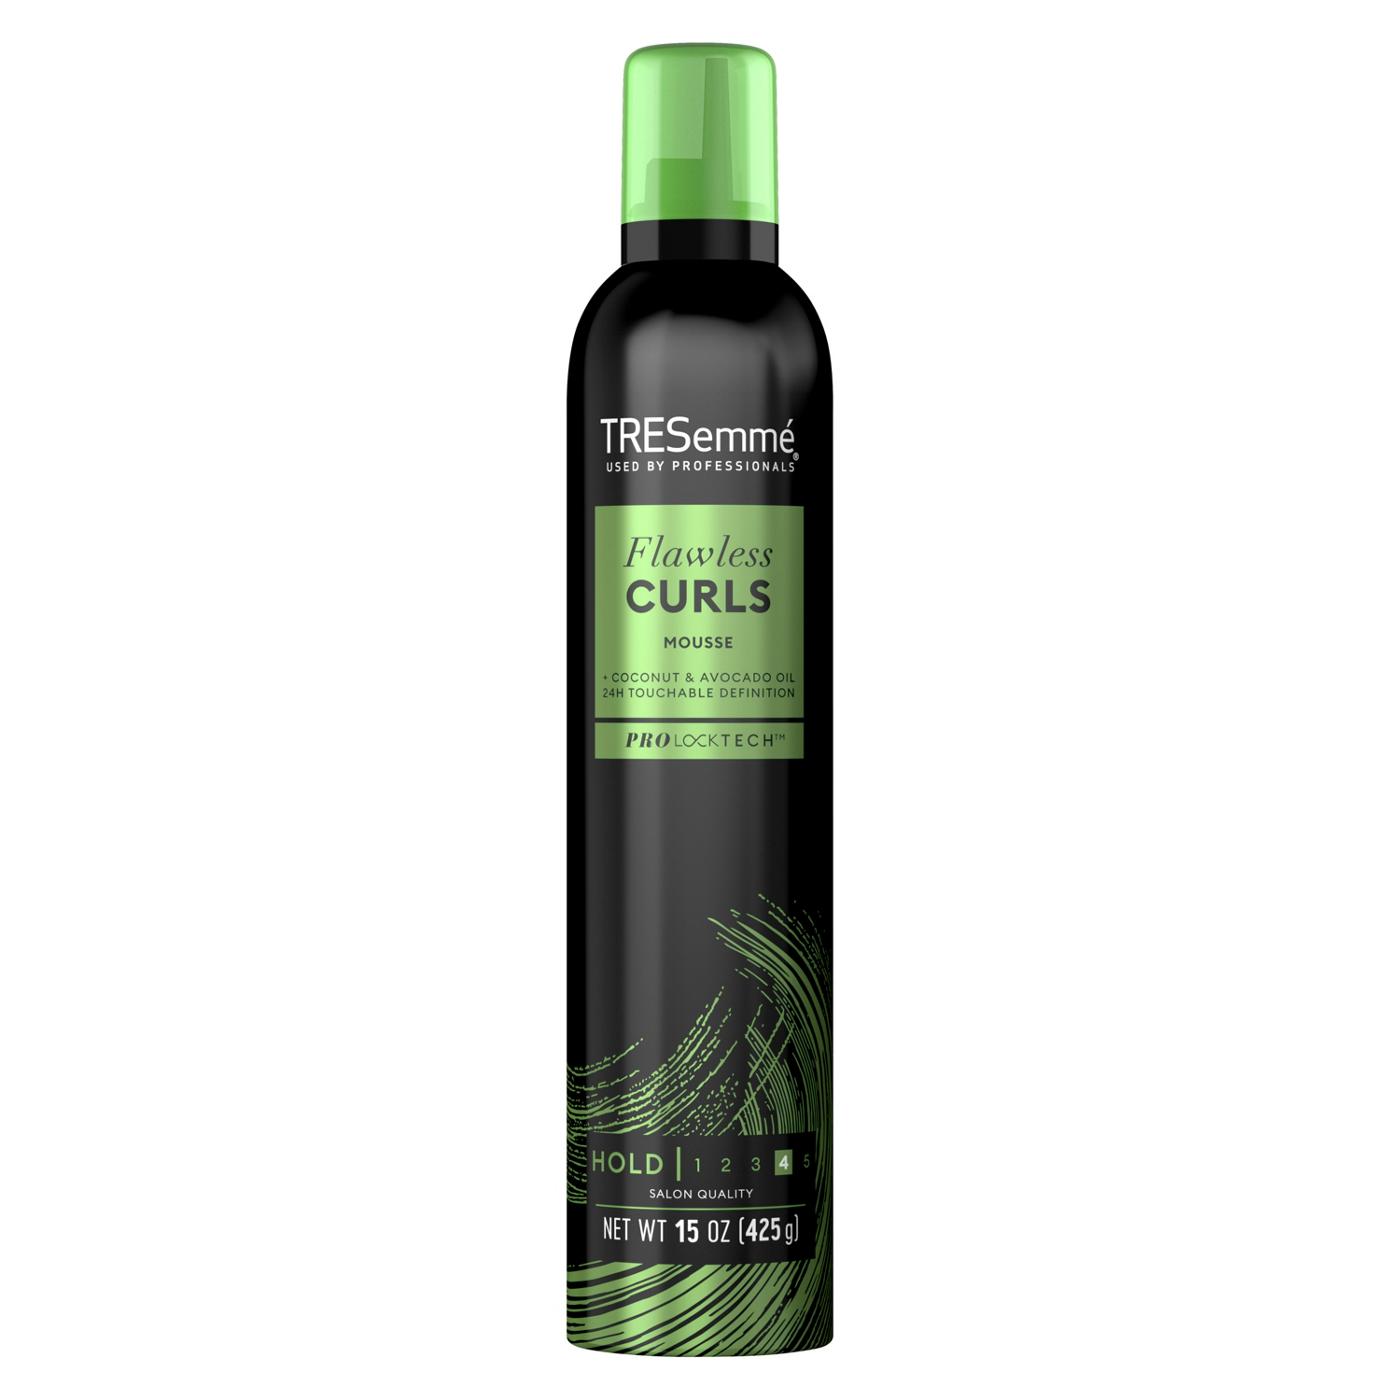 TRESemmé Flawless Curls Extra Hold Mousse ; image 1 of 4